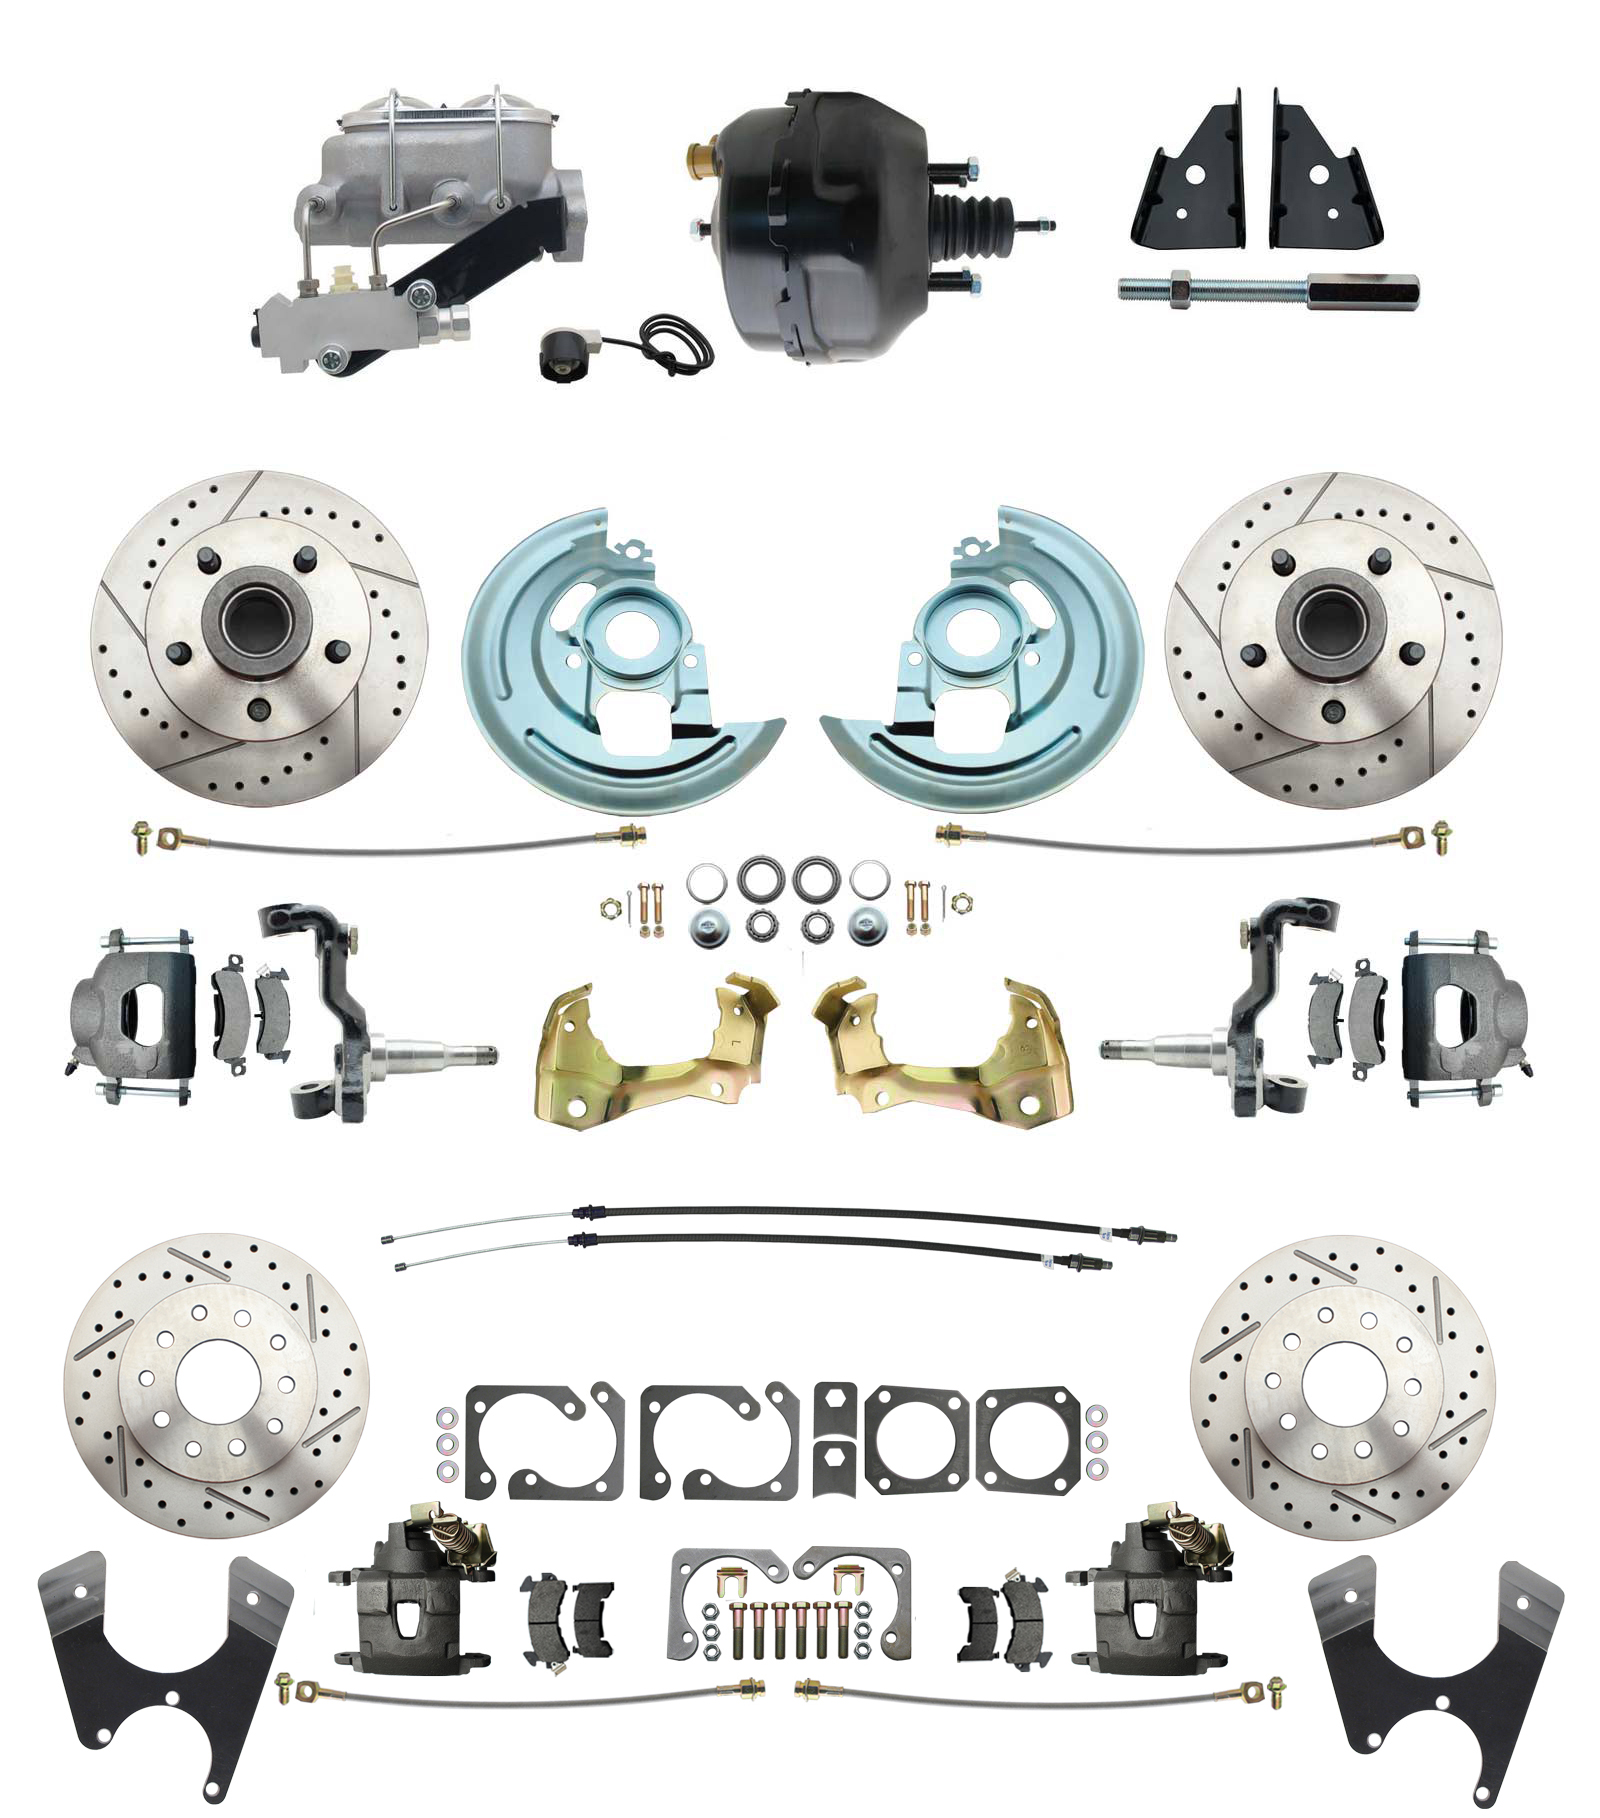 1967-1969 Camaro/ Firebird & 1968-1974 Chevy Nova Front & Rear Power Disc Brake Conversion Kit Drilled & Slotted Rotors W/ 9 Dual Powder Coated Black Booster Kit